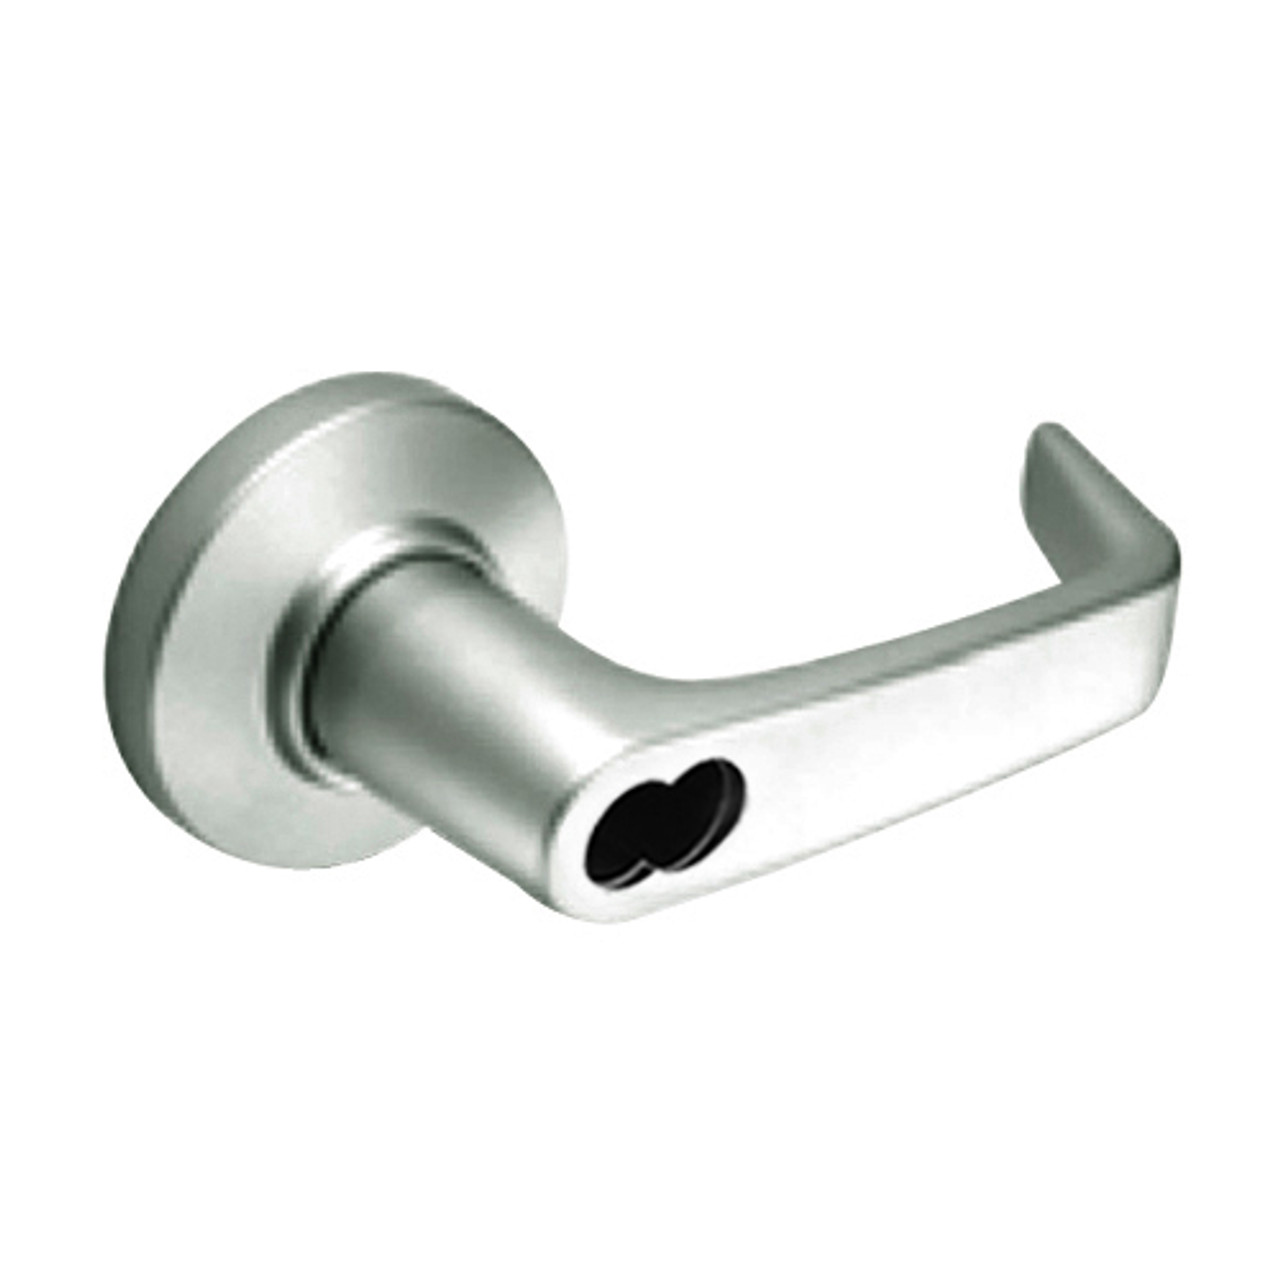 9K37A15CSTK619 Best 9K Series Dormitory or Storeroom Cylindrical Lever Locks with Contour Angle with Return Lever Design Accept 7 Pin Best Core in Satin Nickel